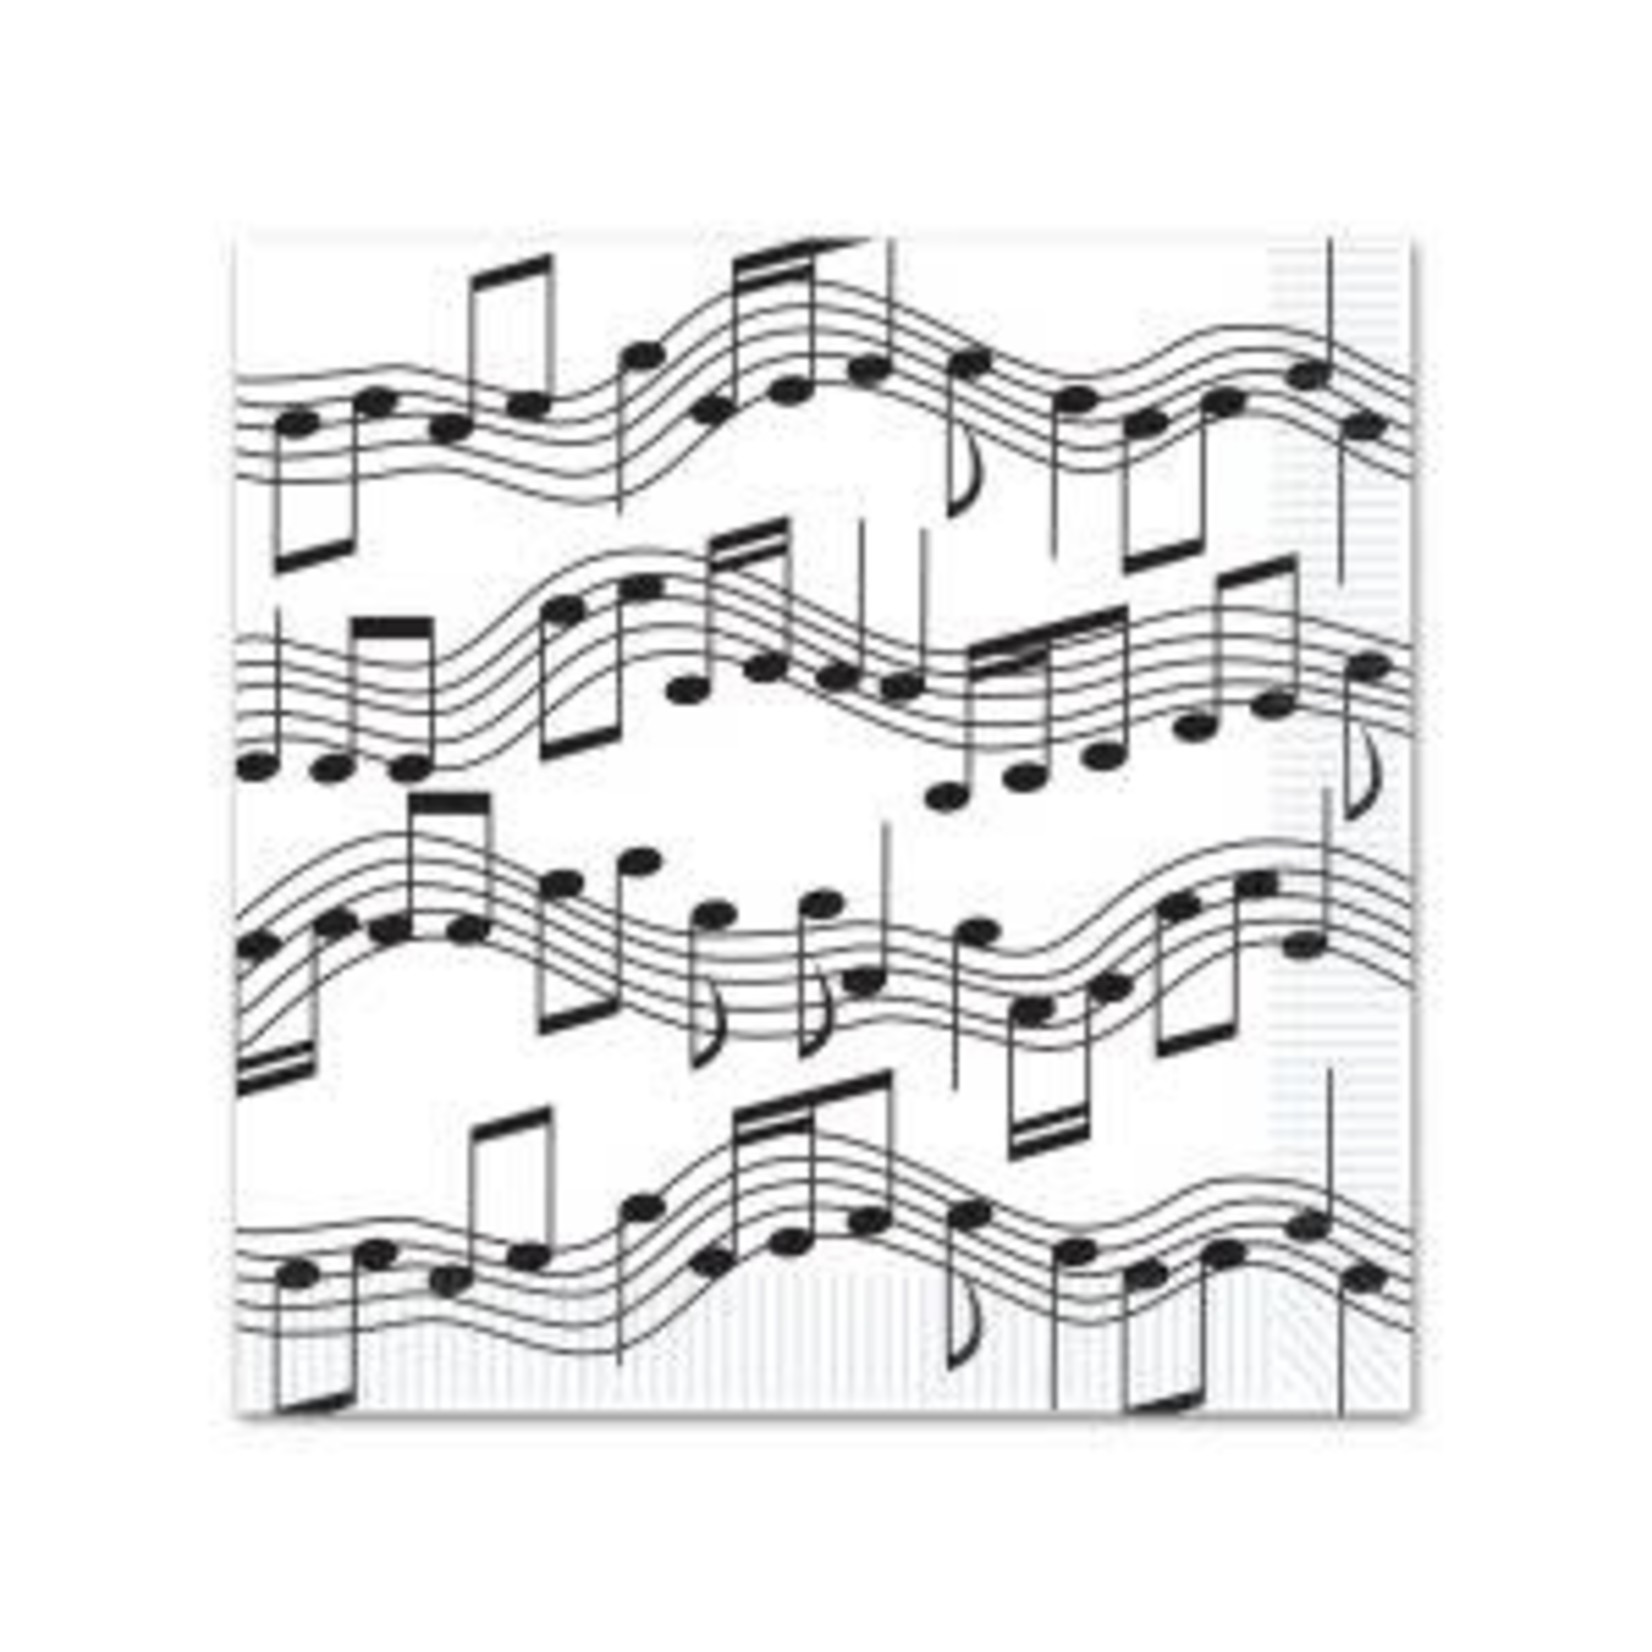 Beistle Musical Notes Lunch Napkins - 16ct.